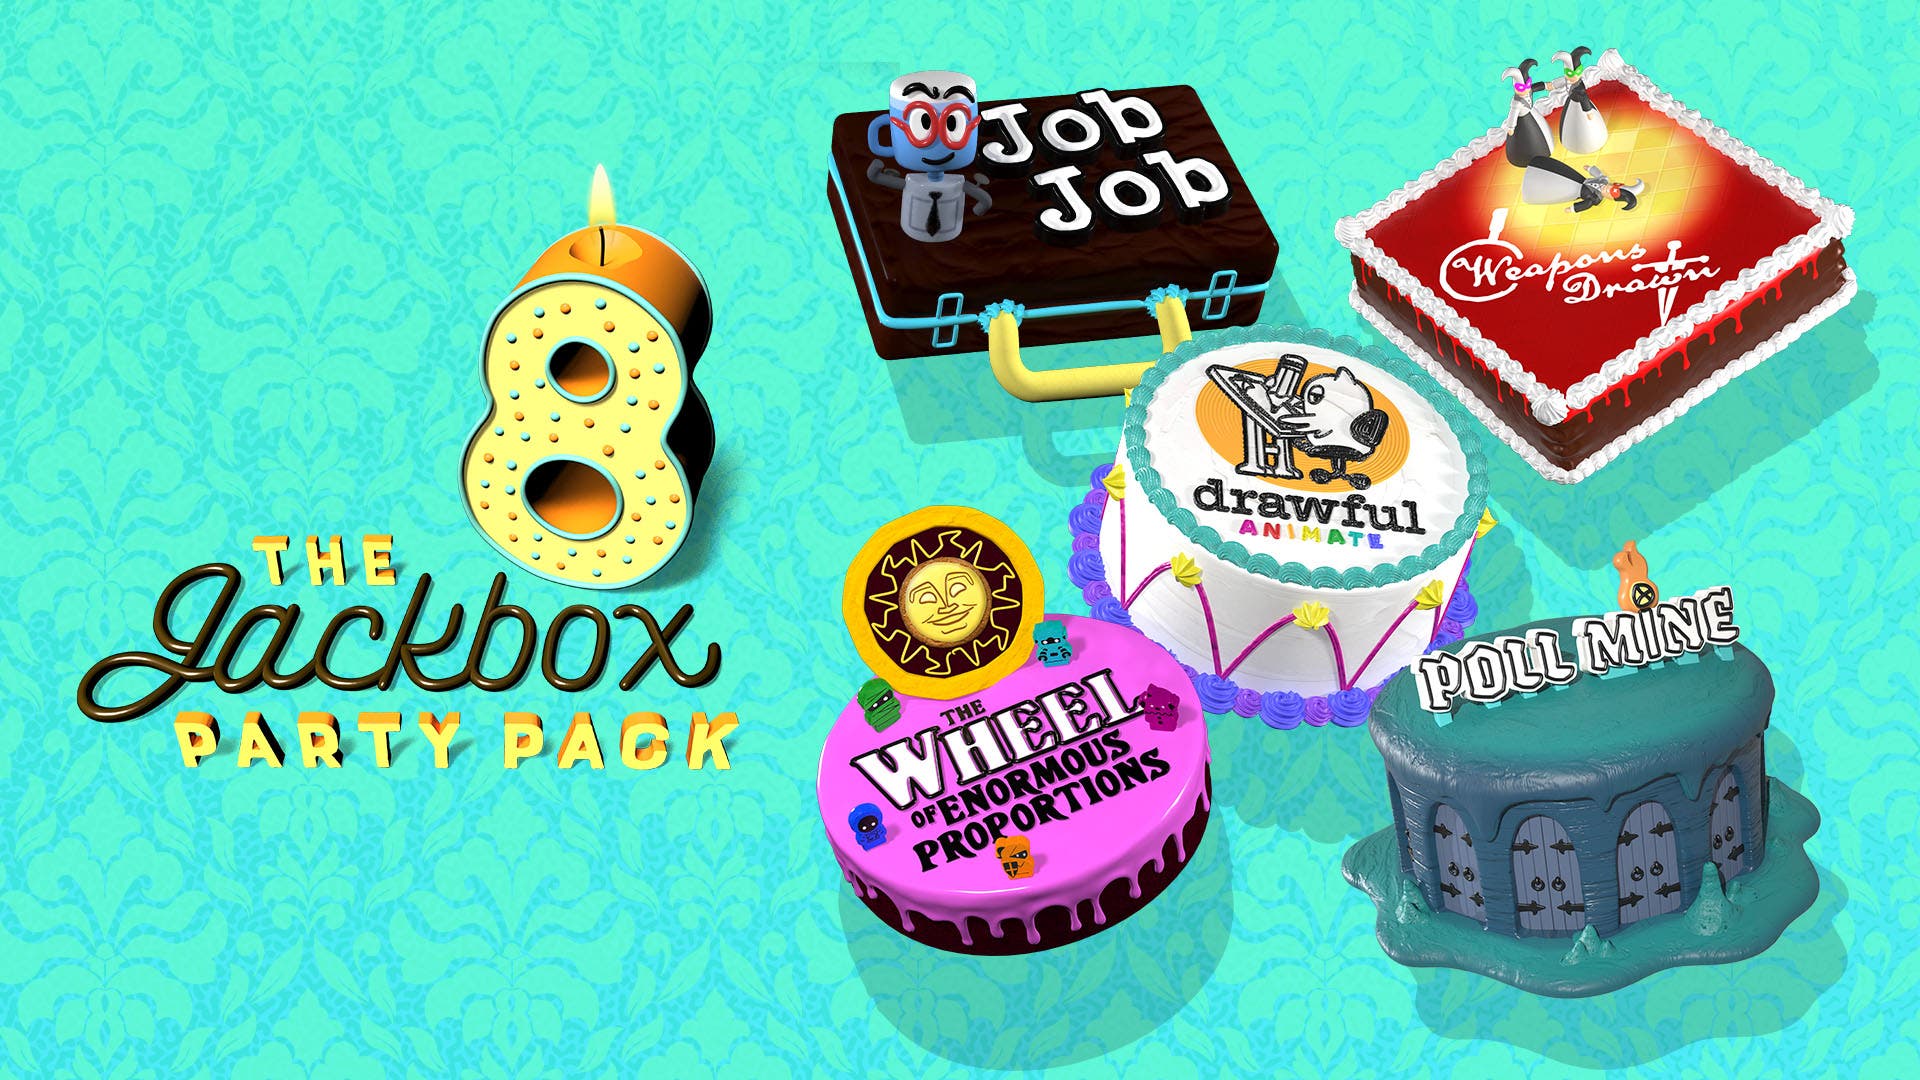 JackboxPartyPack8 review featured